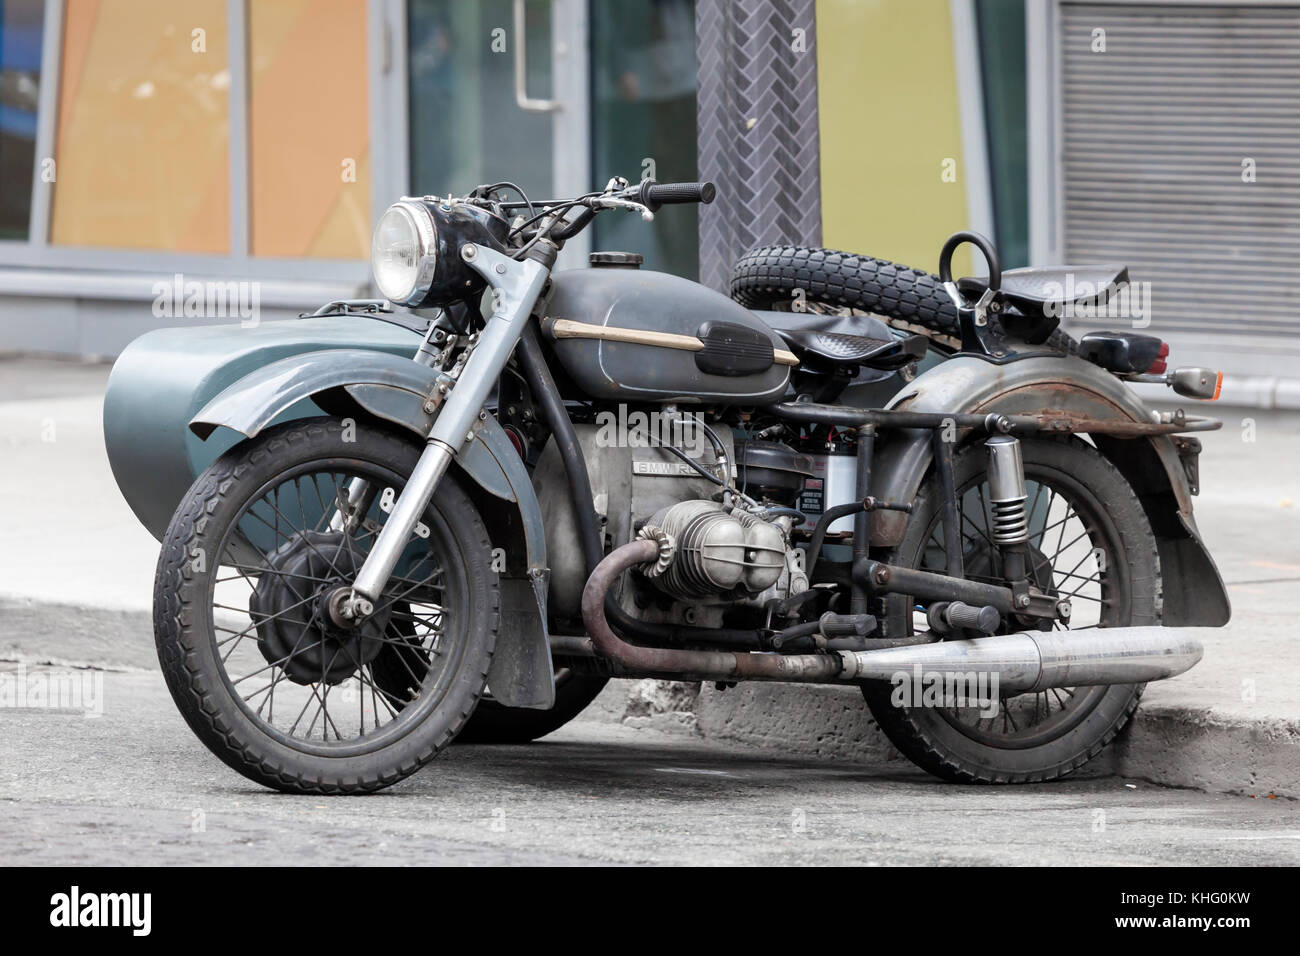 Toronto, Canada - Oct 14, 2017: Old BMW motorcycle with a side car parked downtown in Toronto, Canada Stock Photo